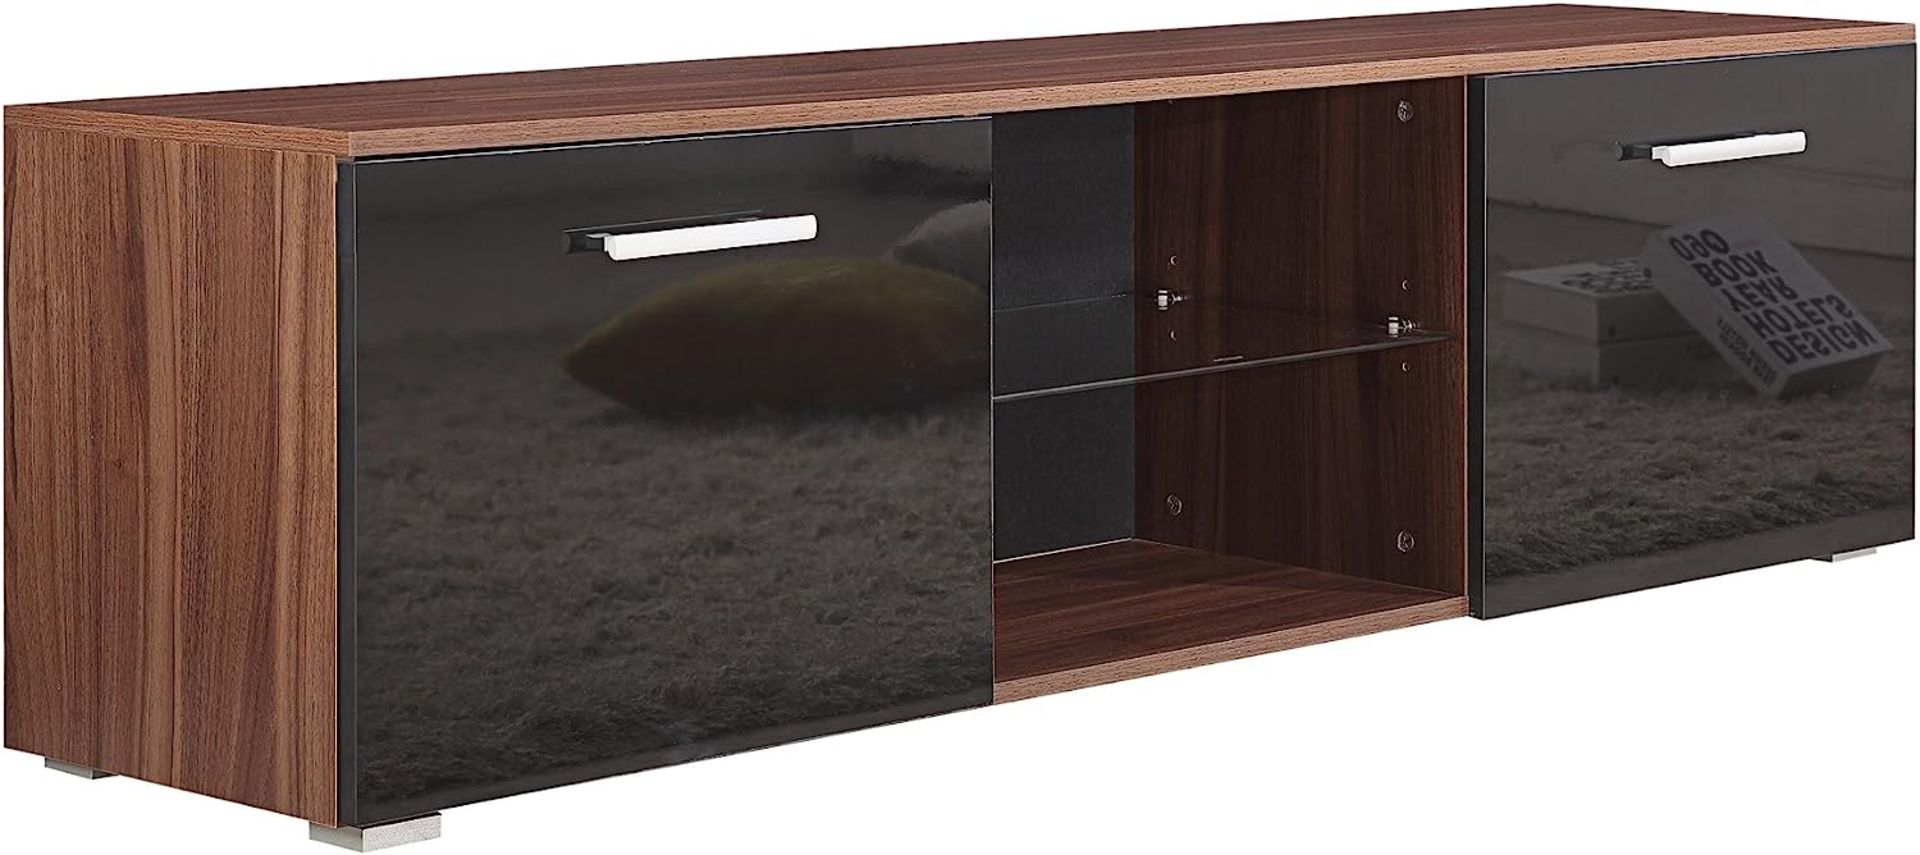 HARMIN MODERN 160CM TV STAND CABINET UNIT WITH HIGH GLOSS DOORS (BLACK ON WALNUT) - Image 3 of 9